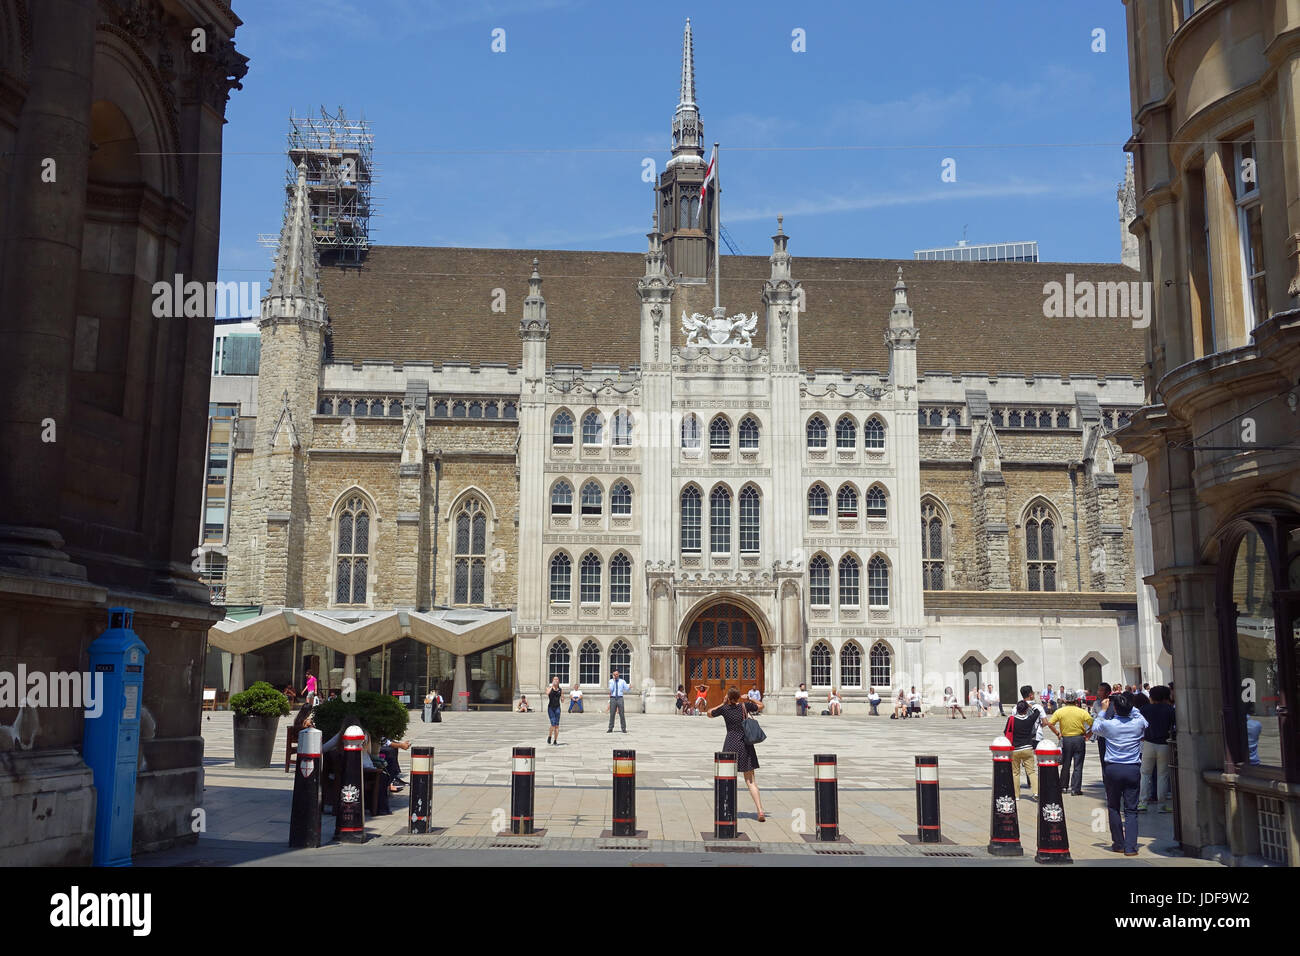 Front view of the Guildhall in the City of London UK Stock Photo